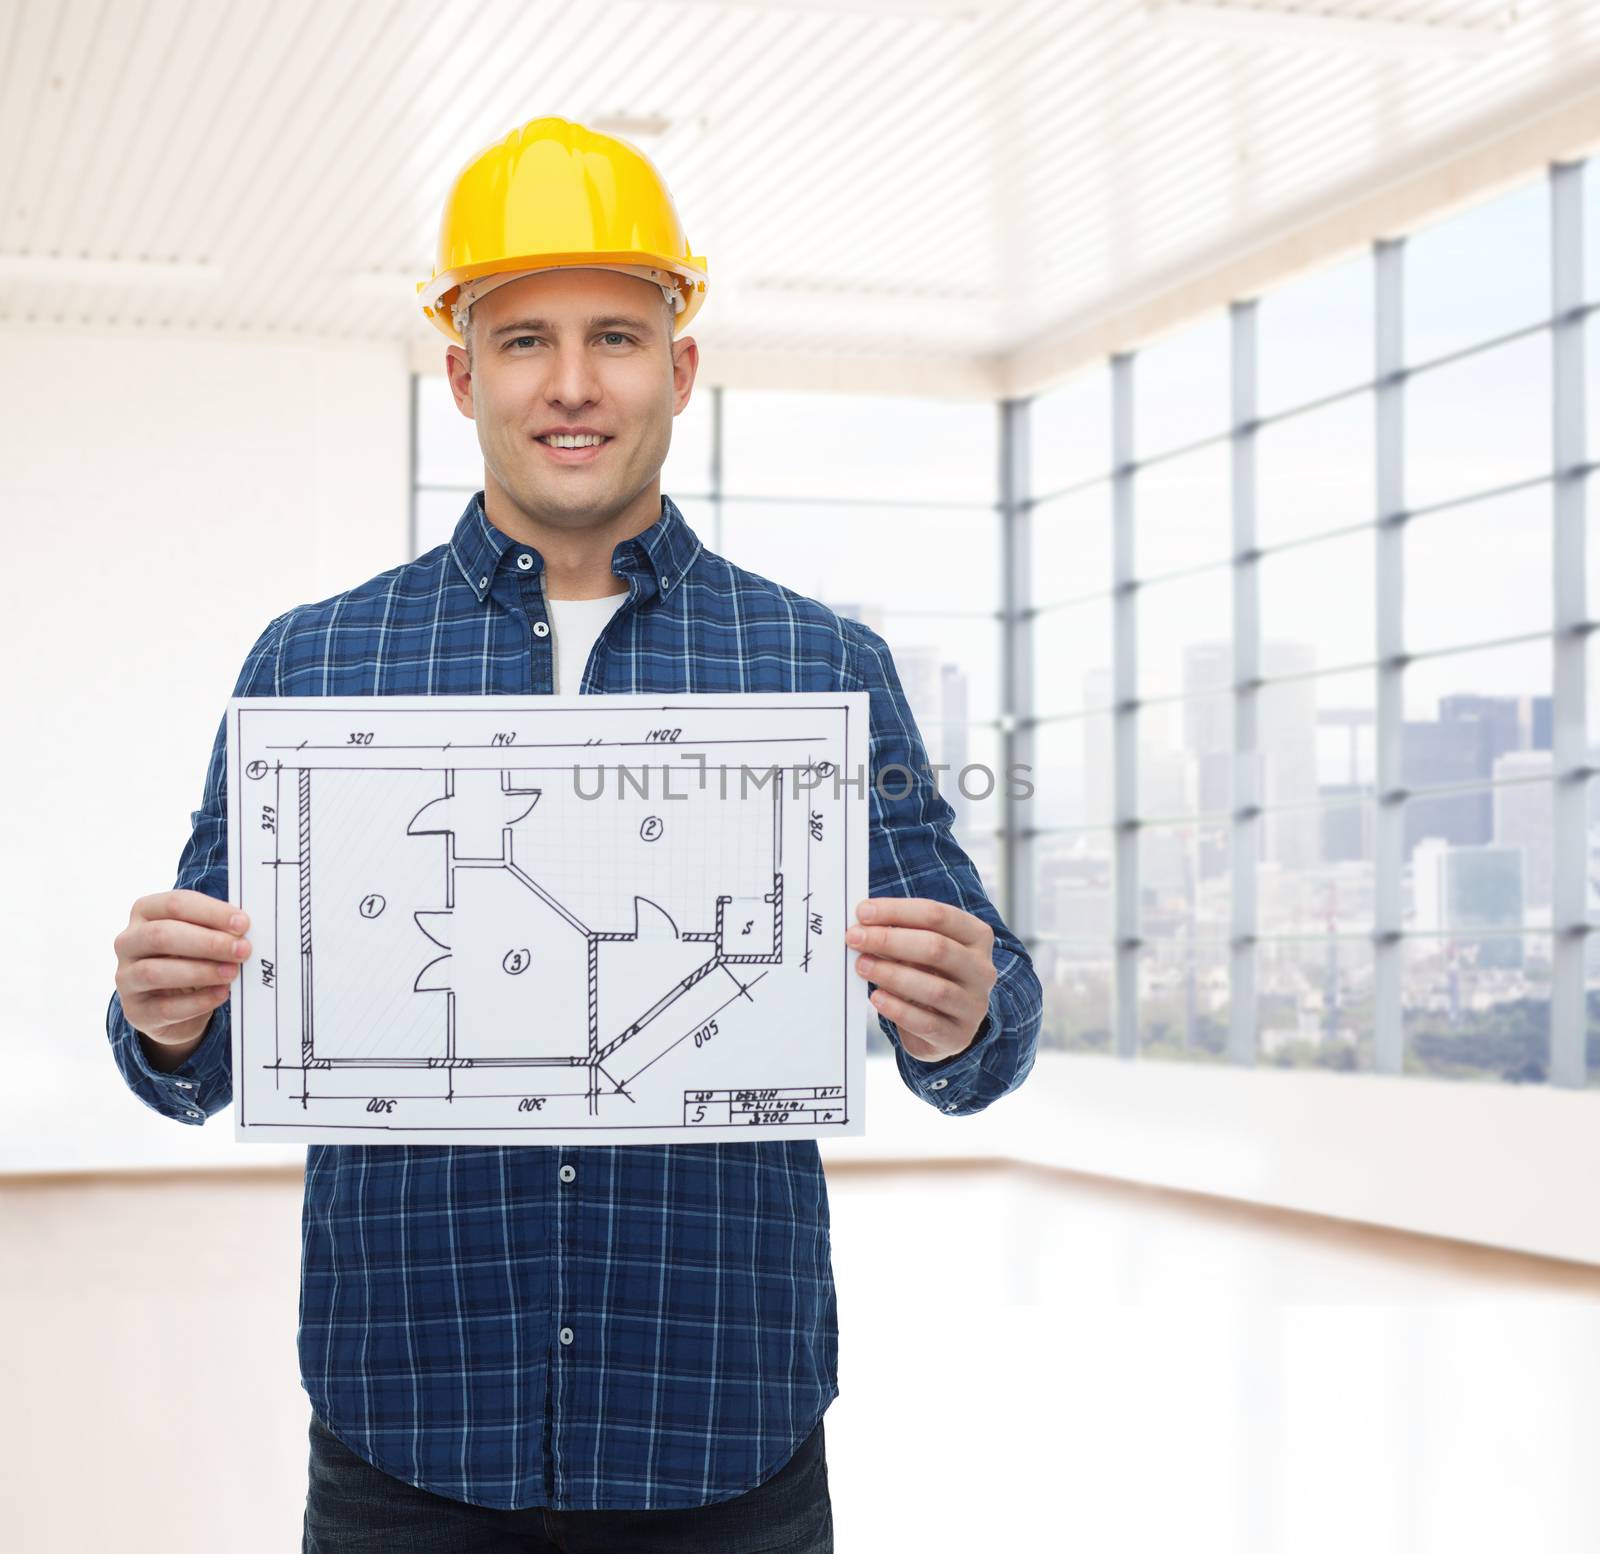 repair, construction, building, people and maintenance concept - smiling male builder or manual worker in helmet with blueprint over empty flat background